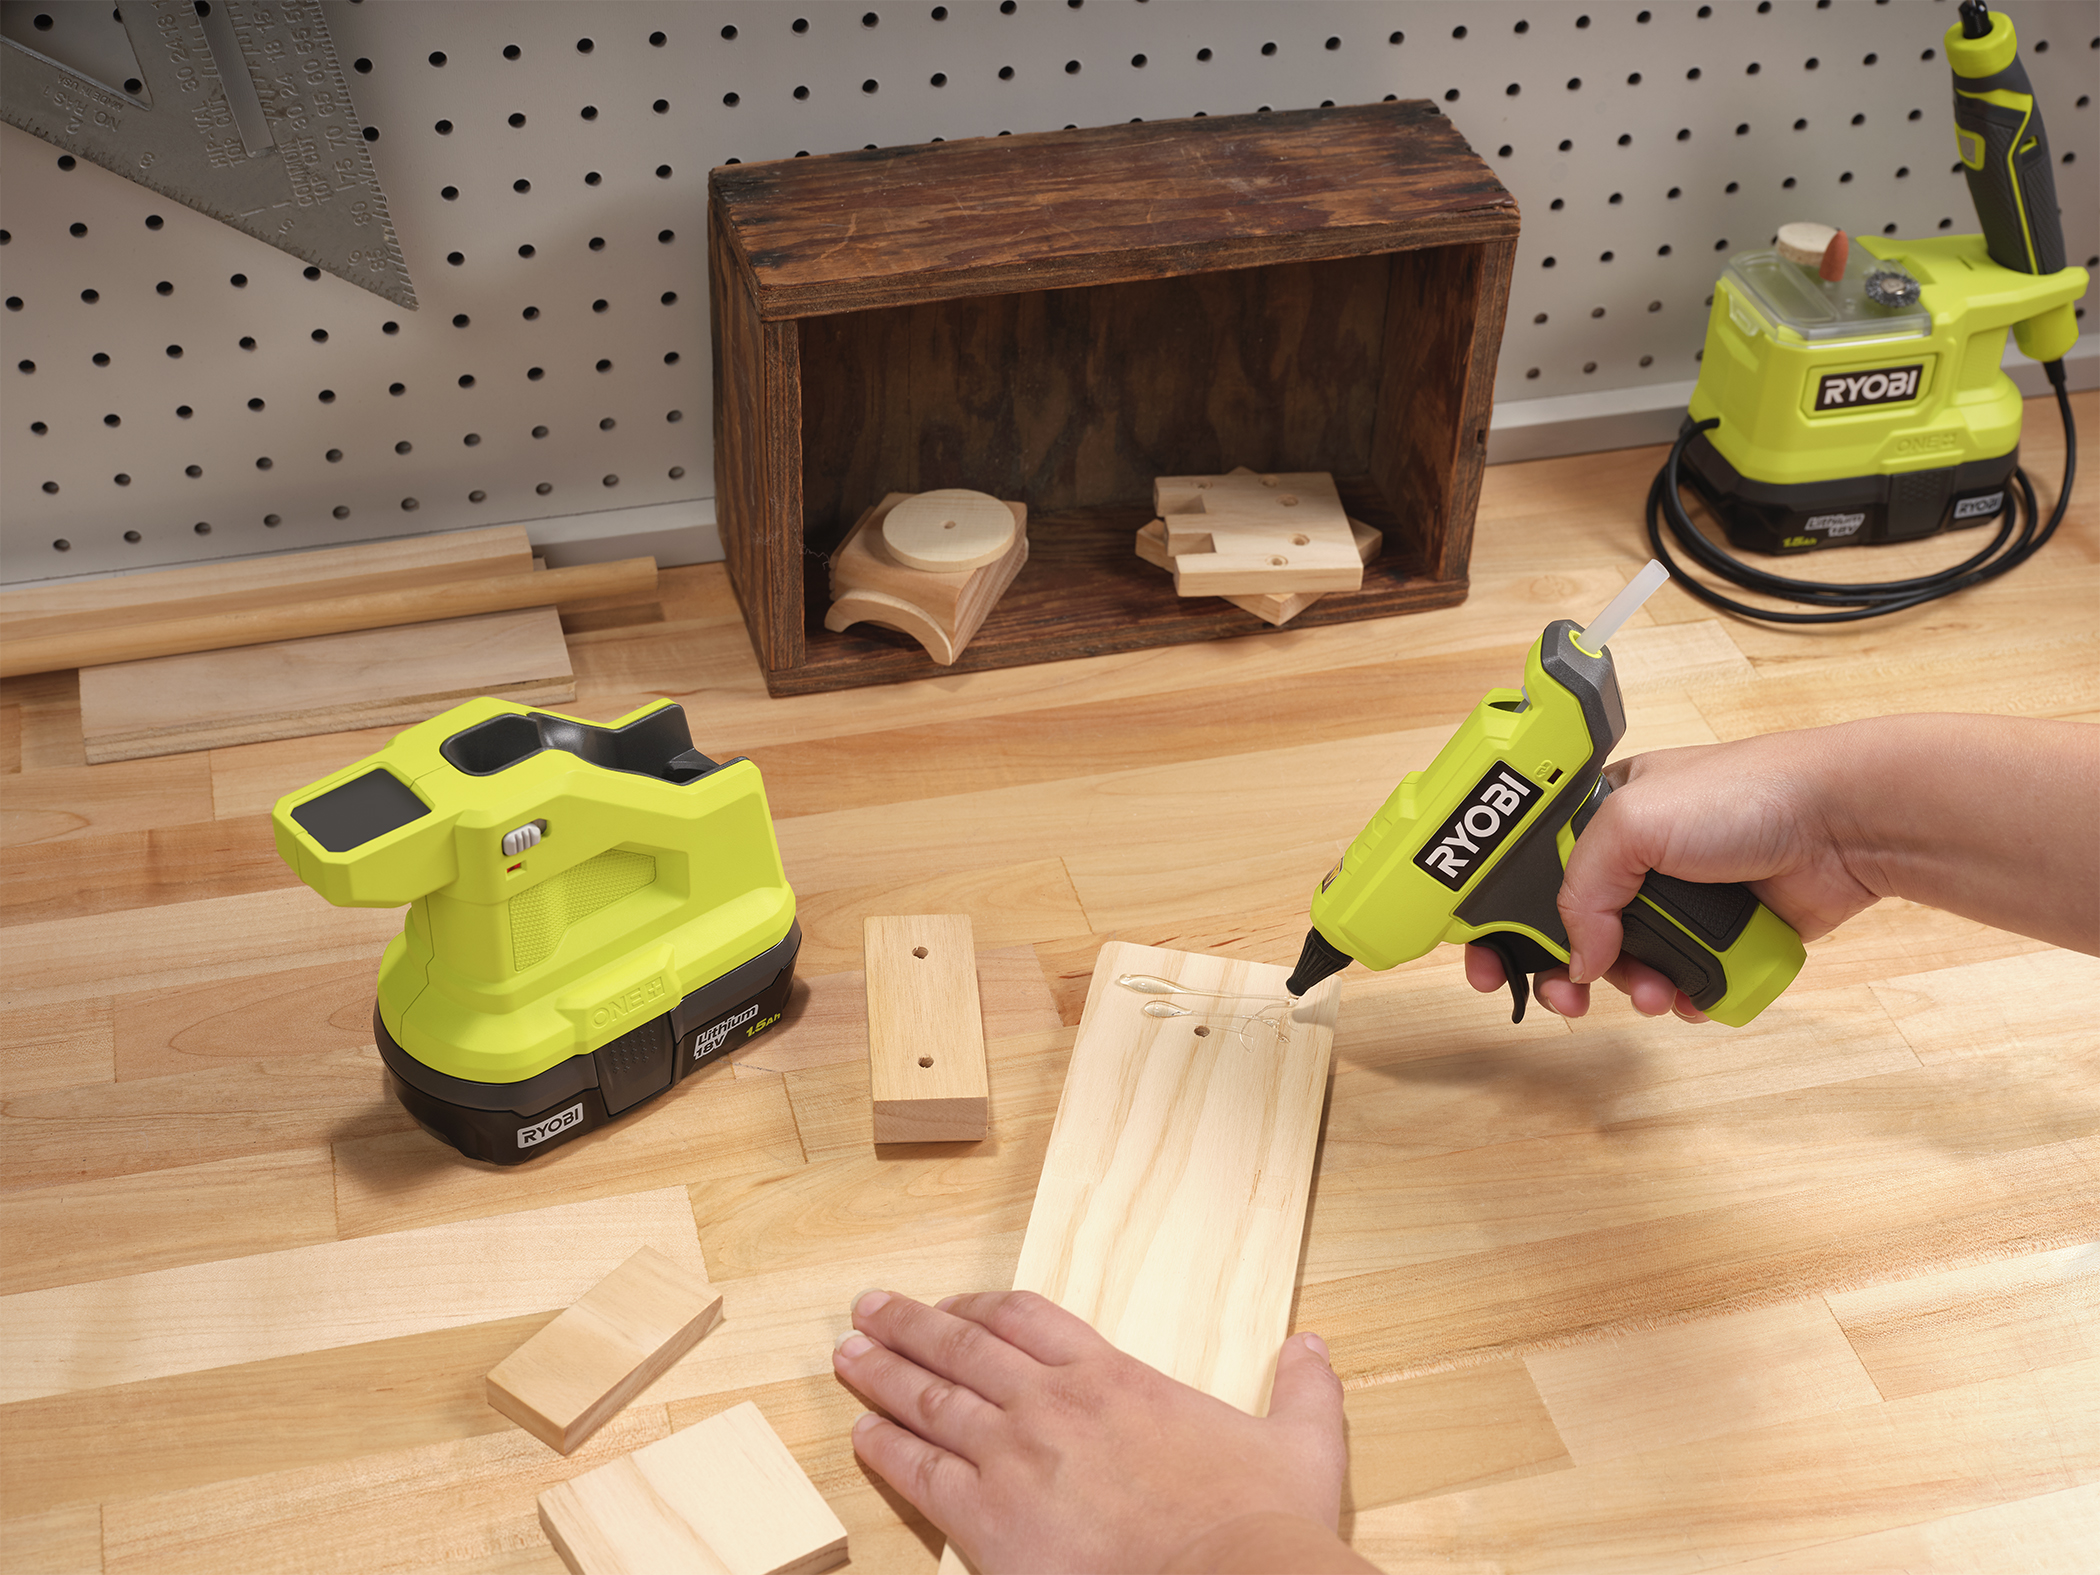  Ryobi 18-Volt ONE+ Cordless Full Size Glue Gun with Charger and  18-Volt ONE+ Lithium-Ion Battery (Bundle) : Tools & Home Improvement